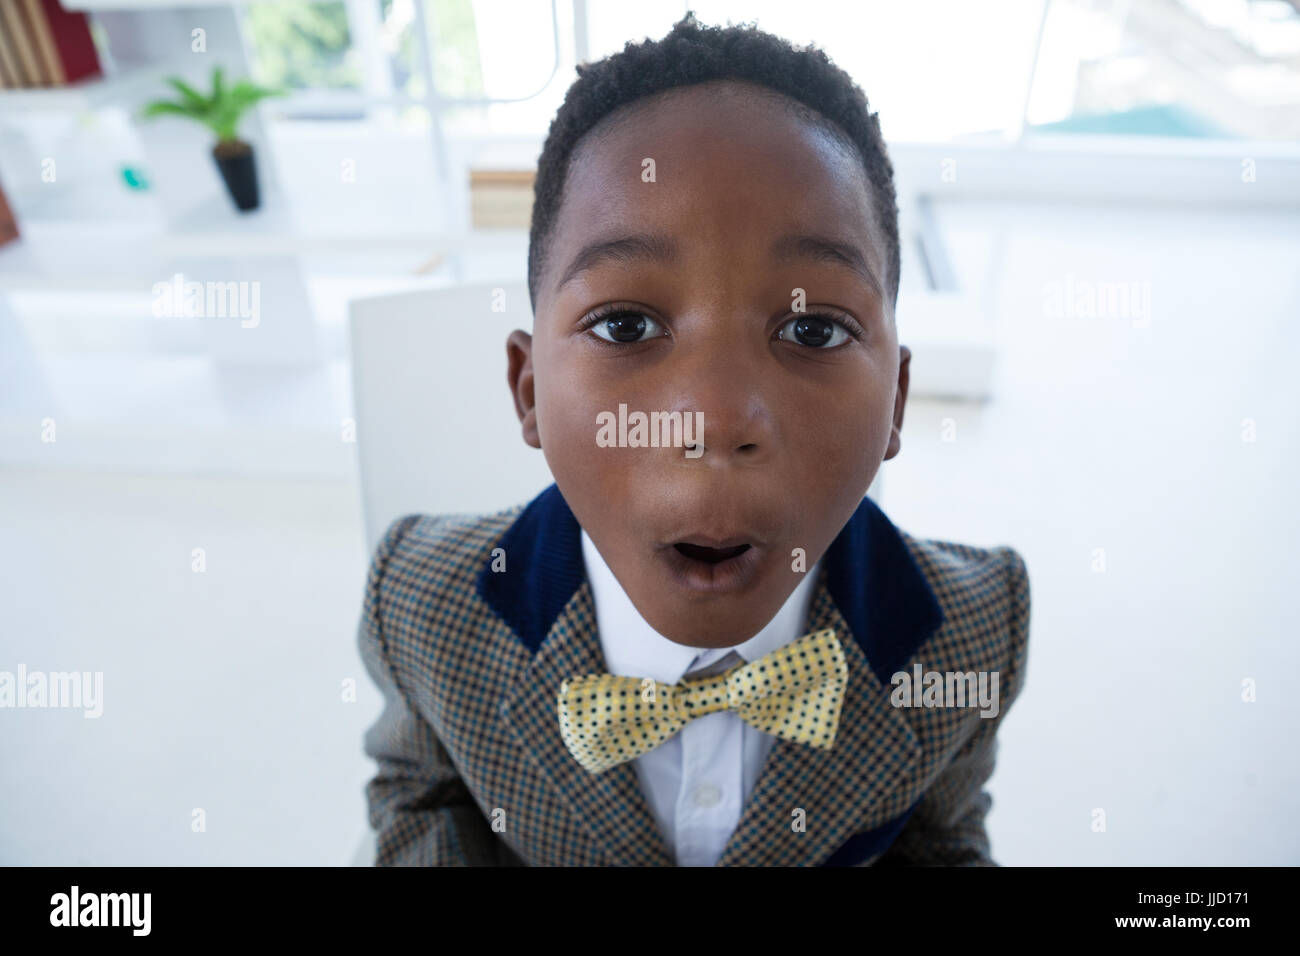 Close up portrait of boy imitating as businessman in office Stock Photo